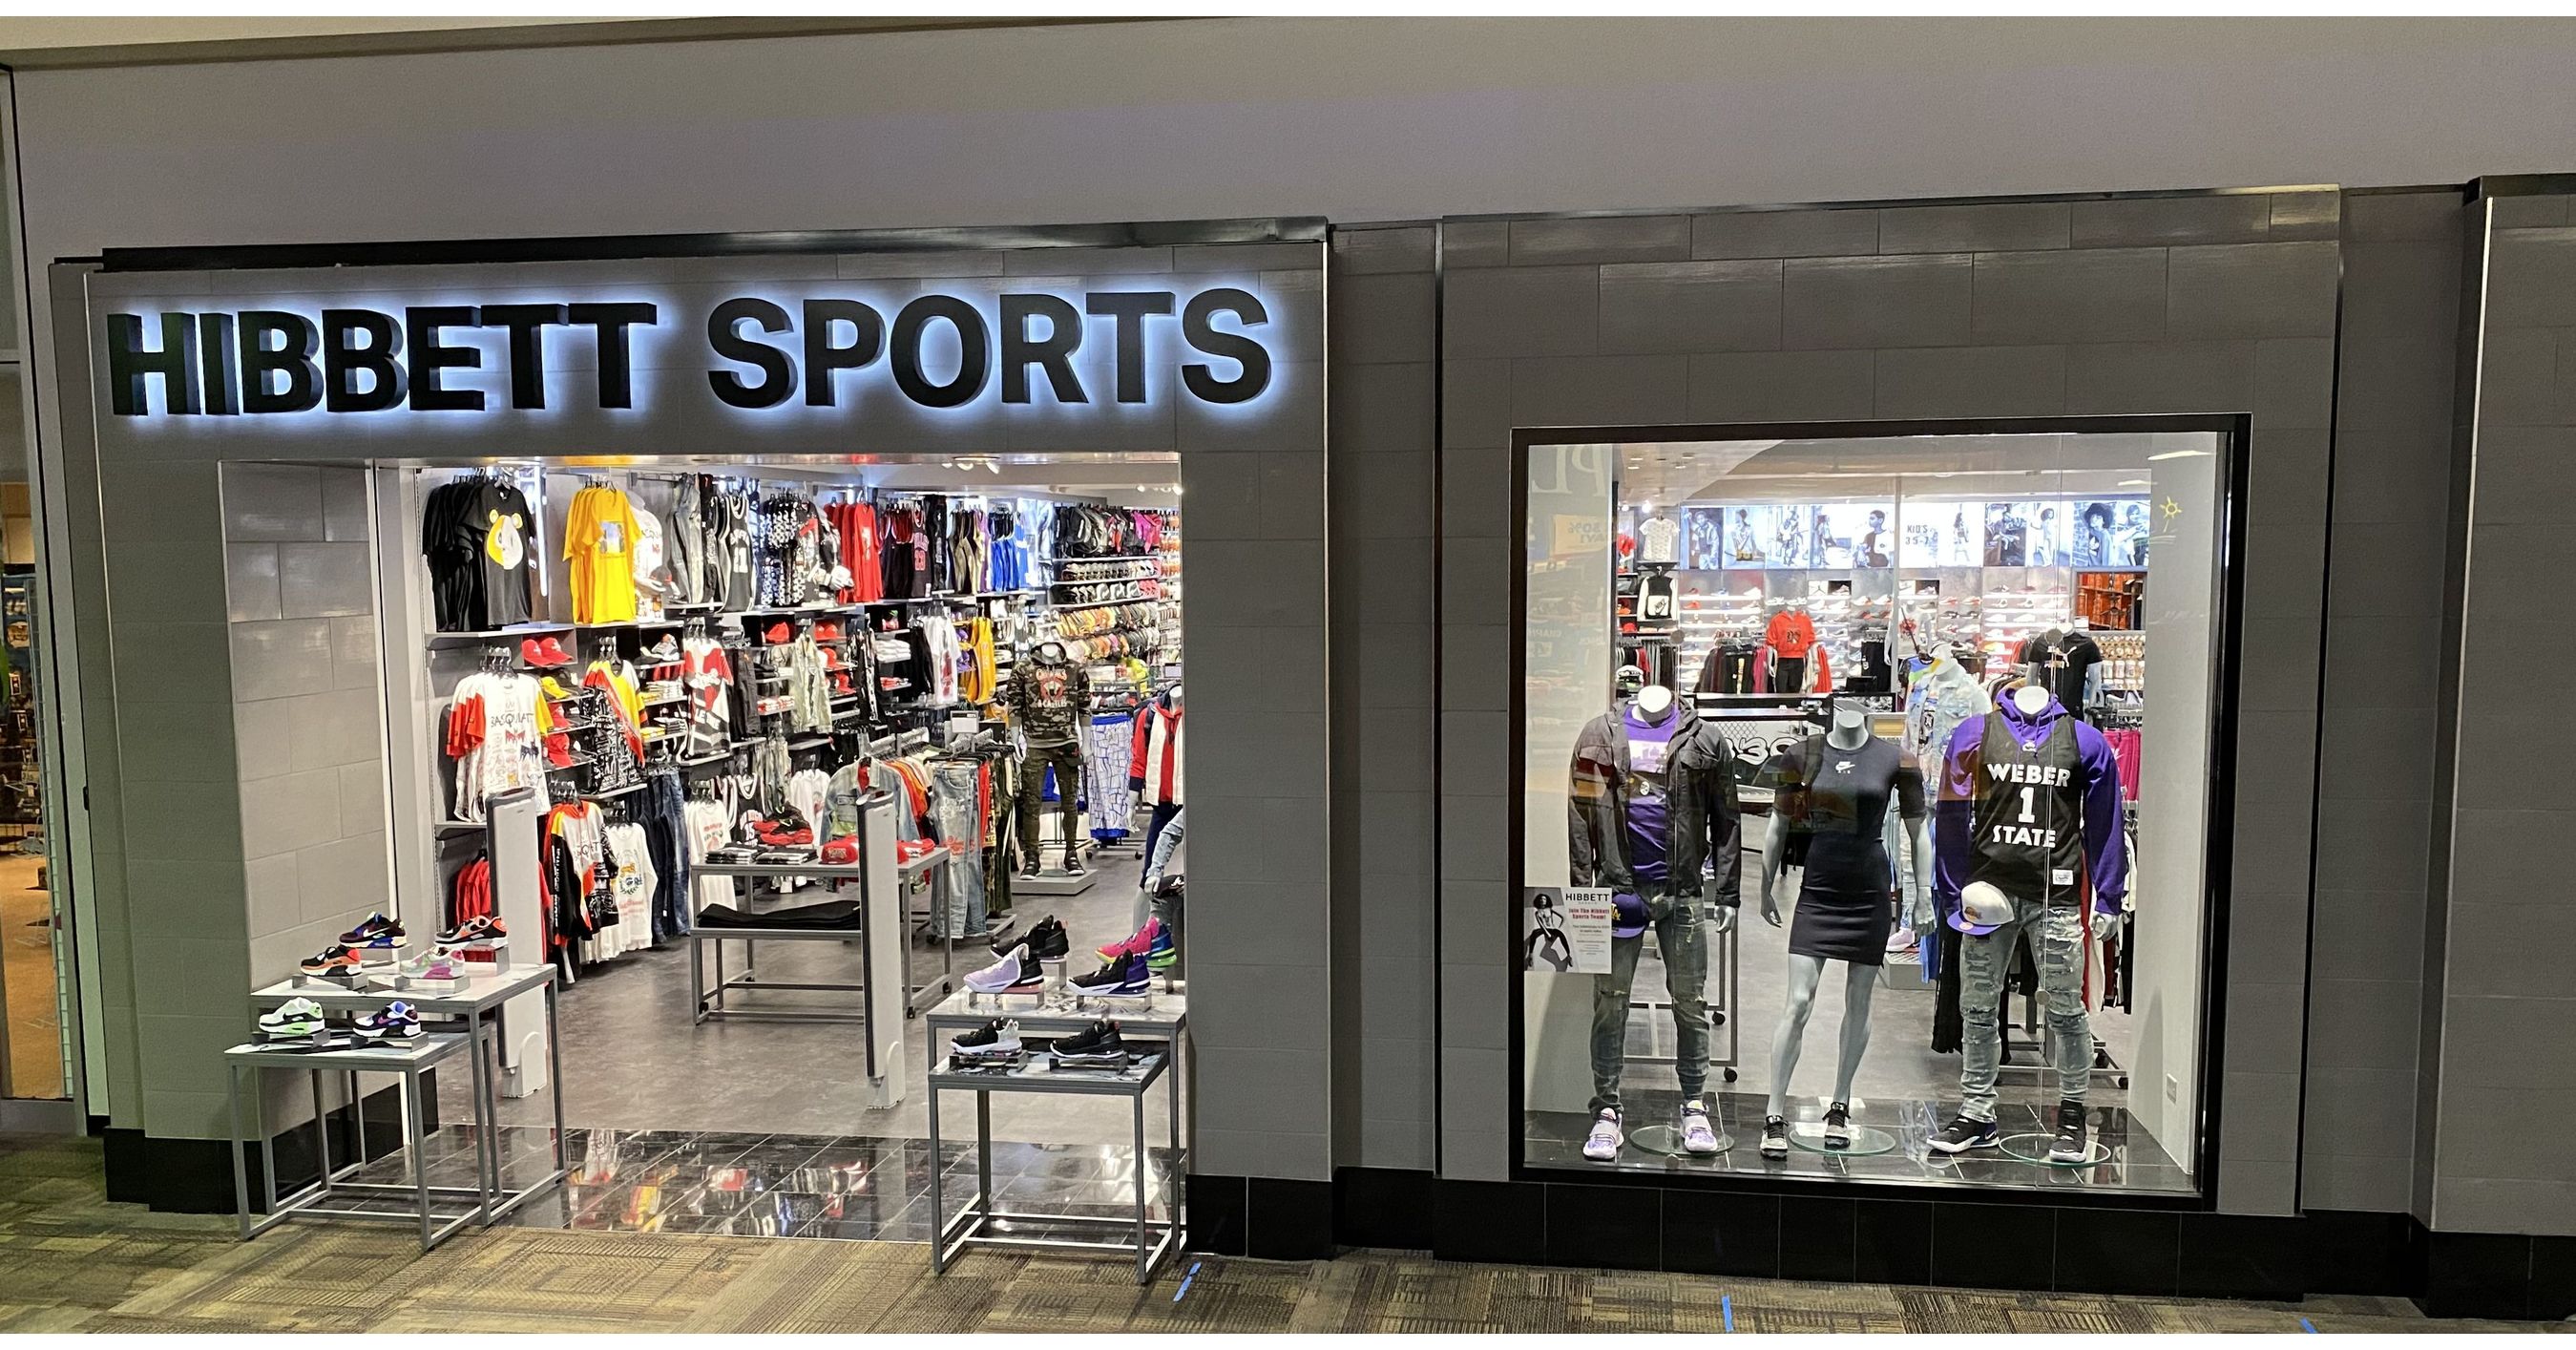 Hibbett Sports (HIBB): Looking Expensive After Strong Pandemic Performance